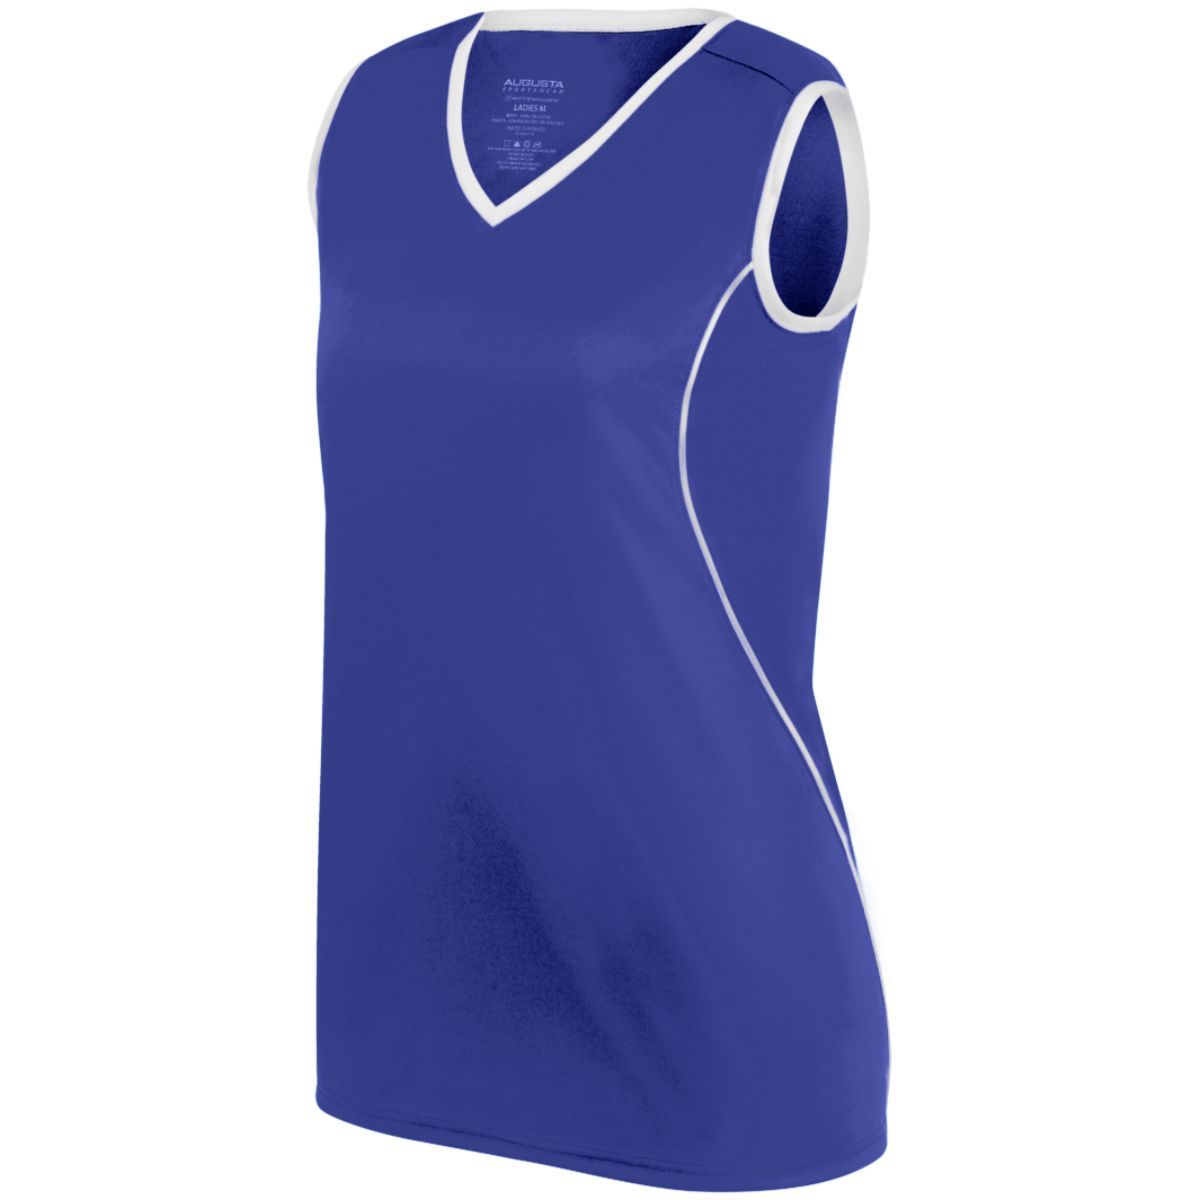 Augusta Sportswear Girls Firebolt Jersey in Purple/White  -Part of the Girls, Augusta-Products, Softball, Girls-Jersey, Shirts product lines at KanaleyCreations.com